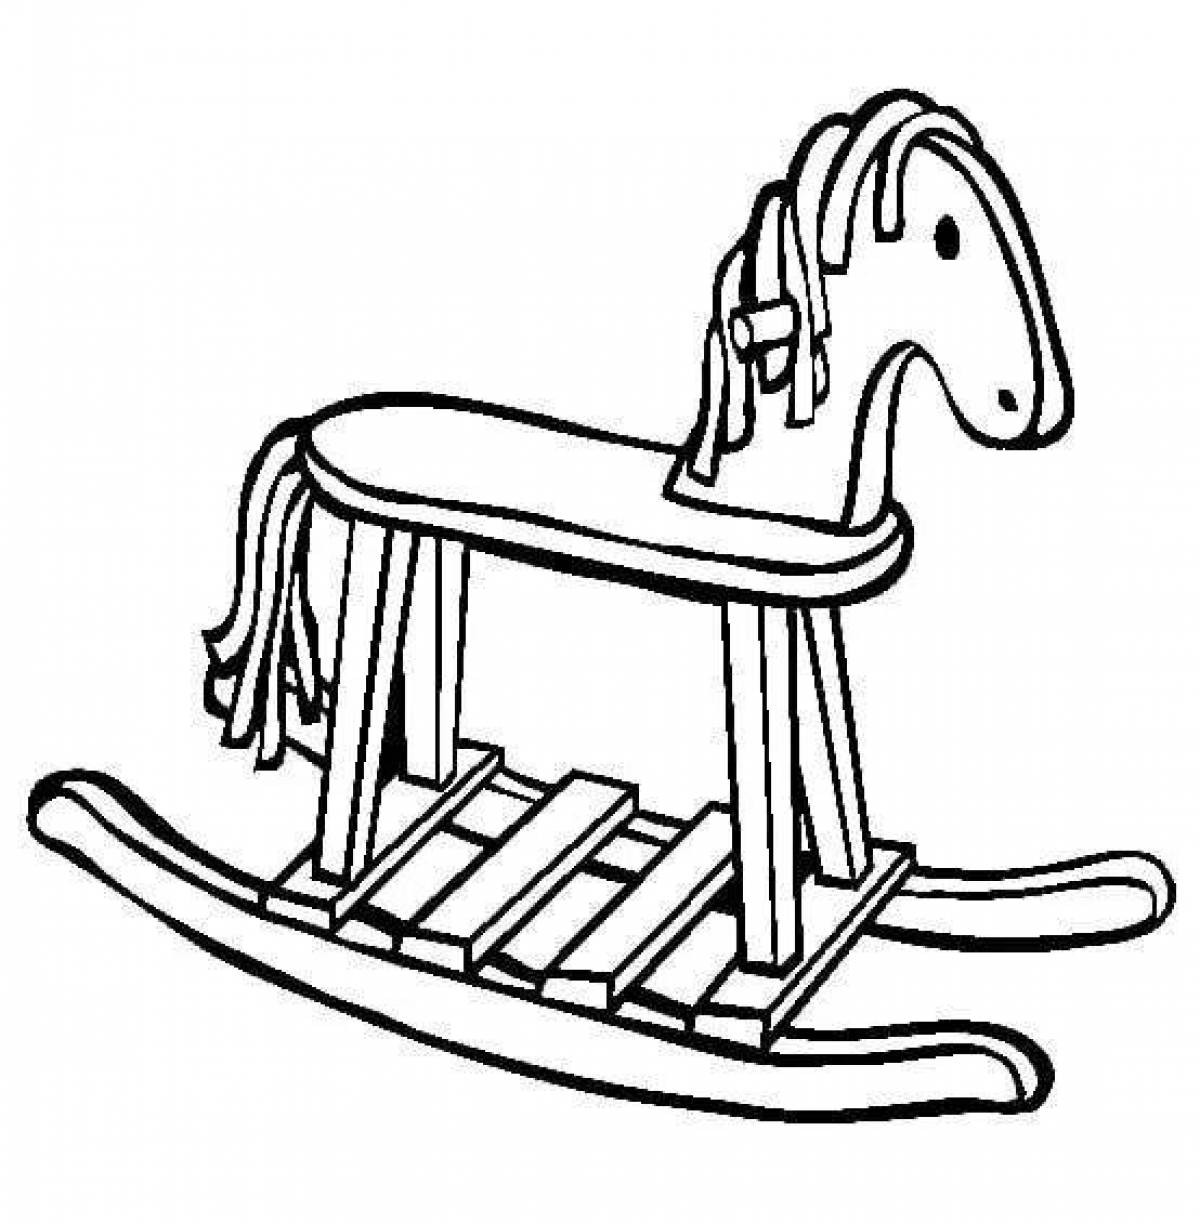 Colored rocking horse